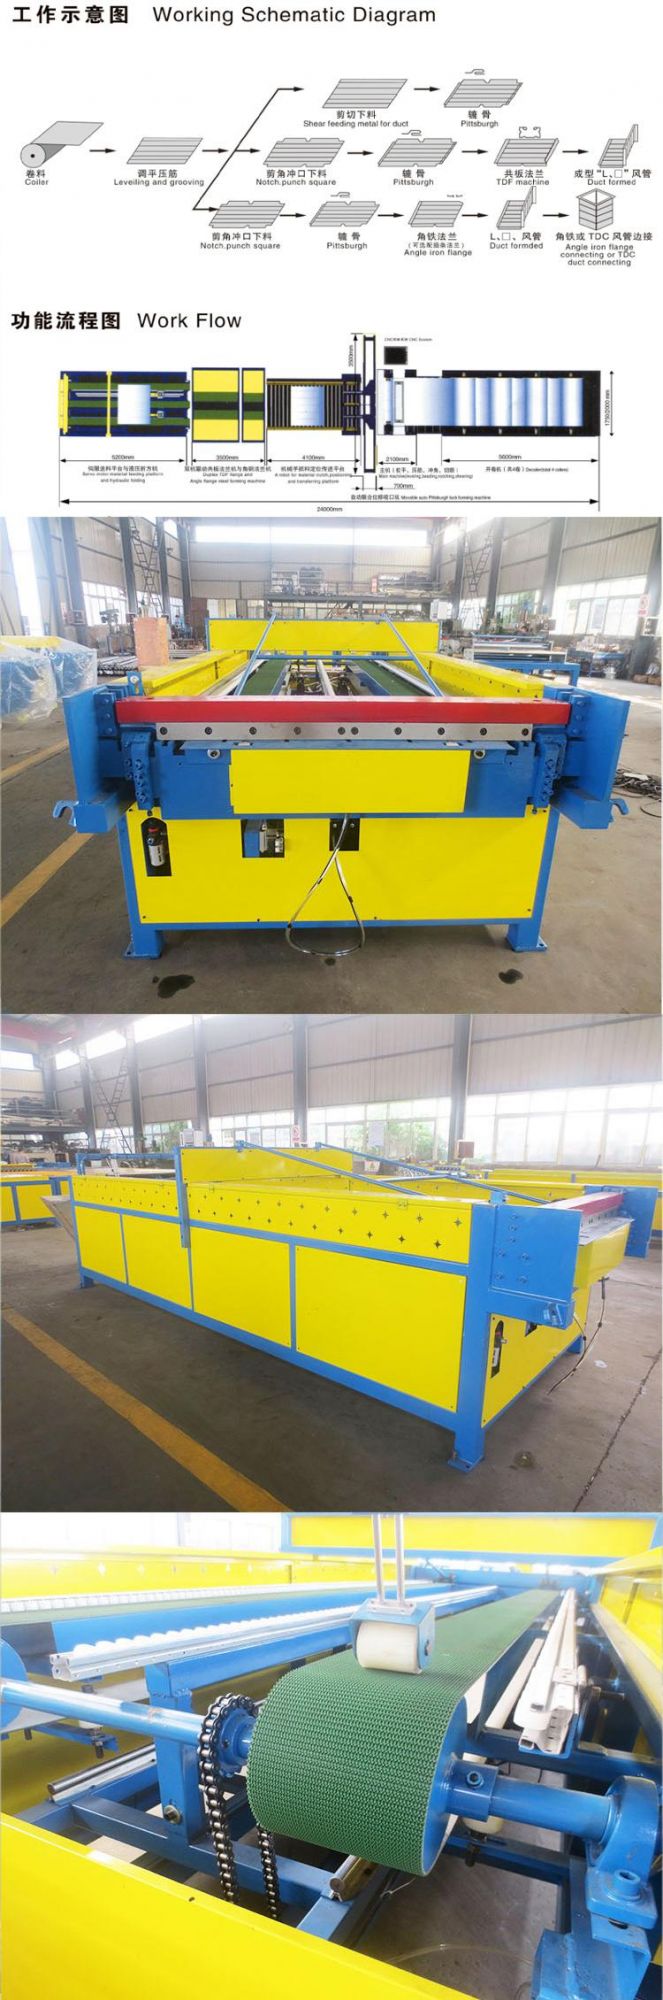 Ysdcnc HVAC Air Duct Making Machine Line Five for Sales